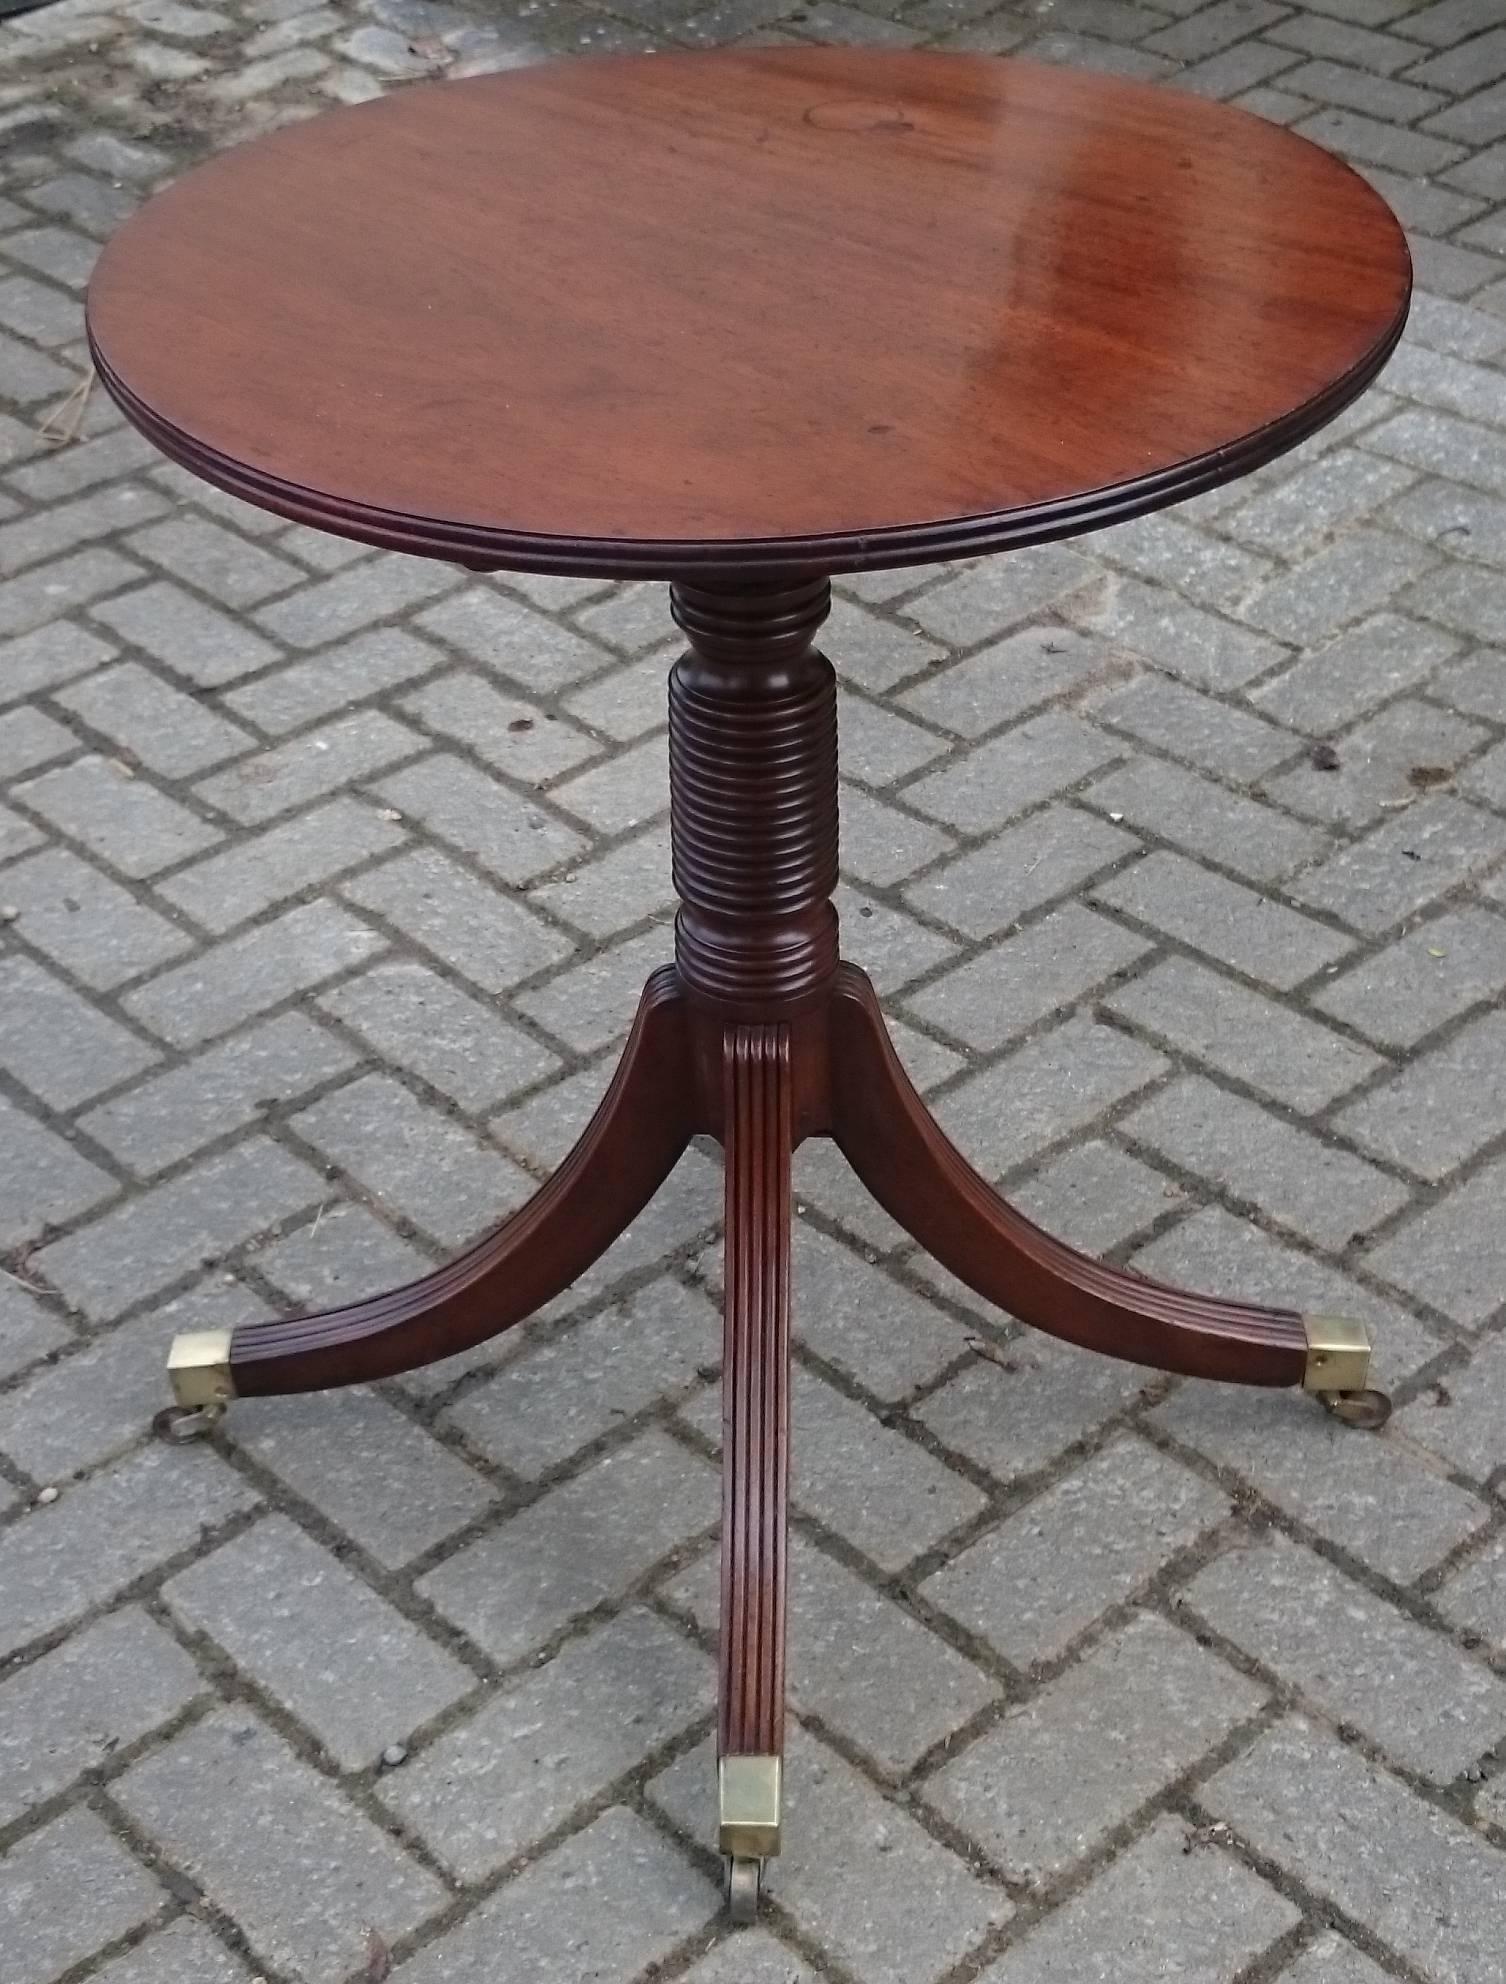 Antique mahogany wine table or lamp table with very elegant turned and reeded base with an unusually generous number of ring turns to the column and lots of reeds on the top of the legs. The edge of the top is also reeded. The whole table is made of